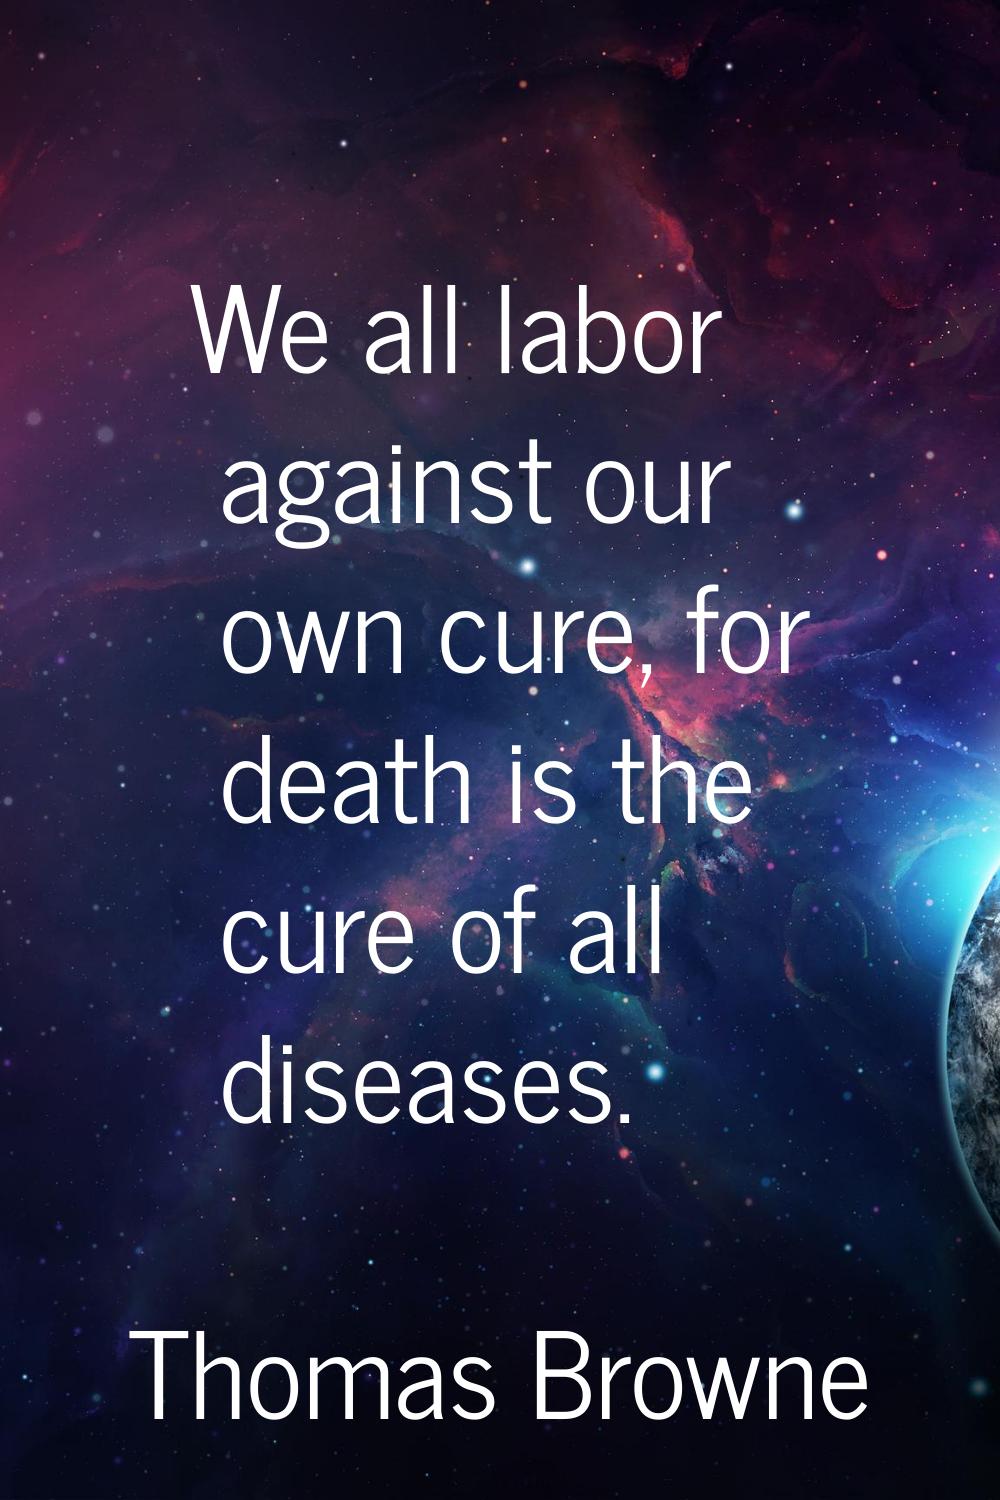 We all labor against our own cure, for death is the cure of all diseases.